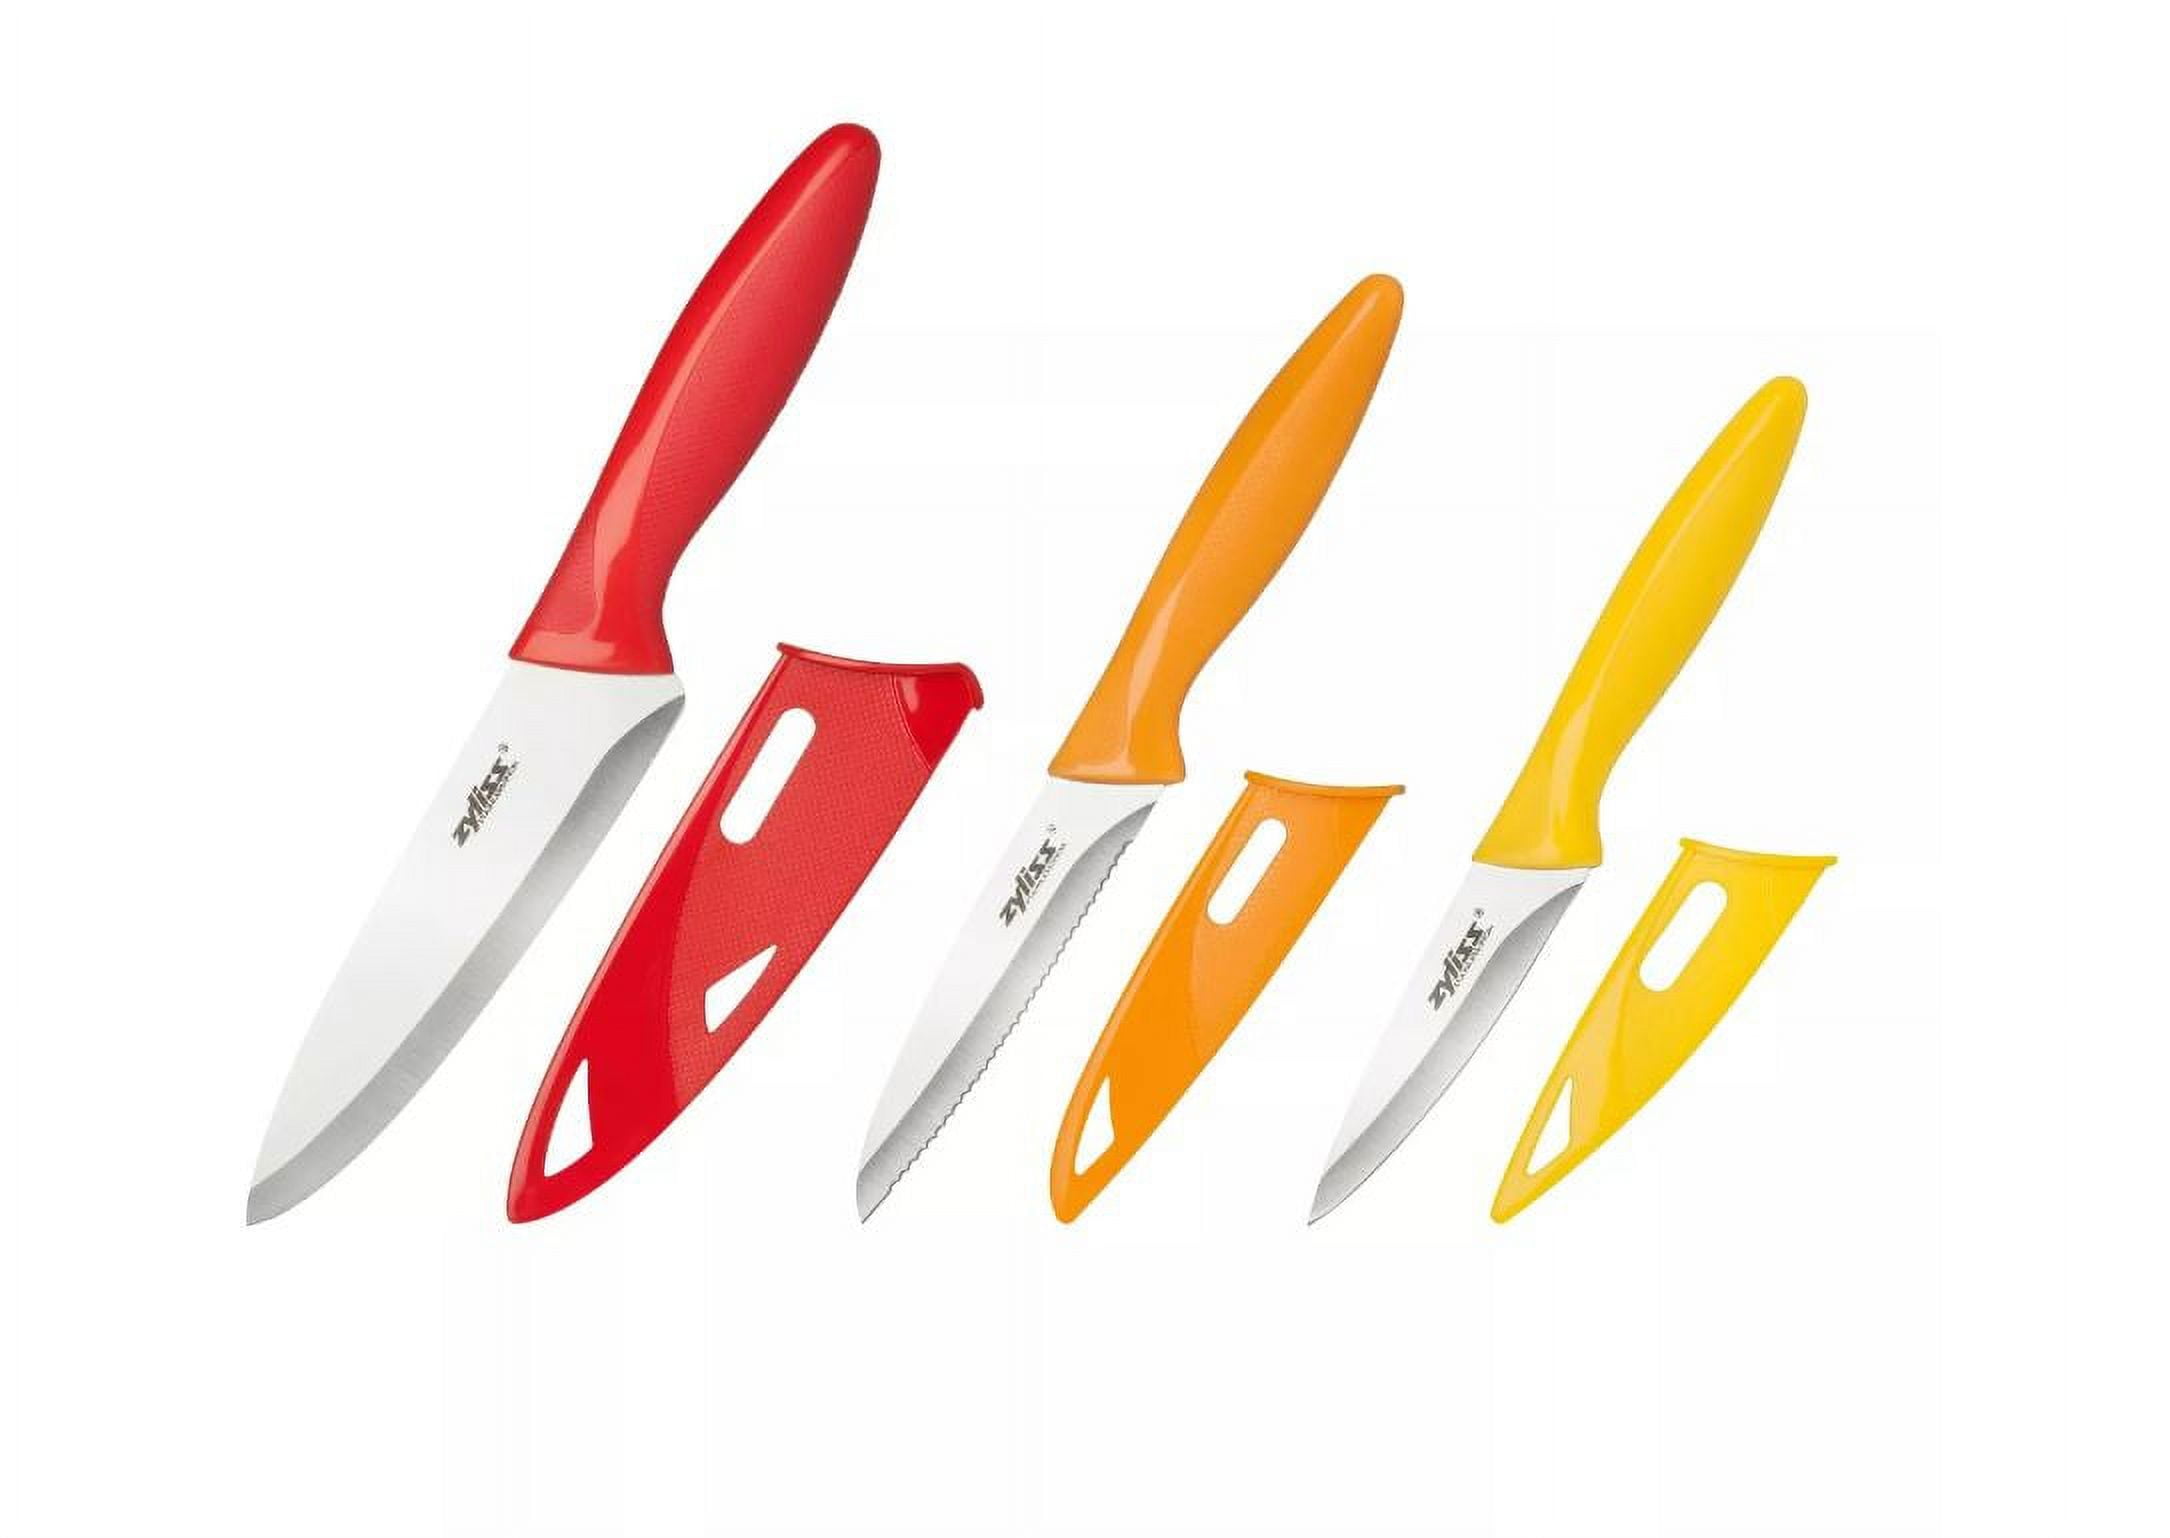 Cheer Collection 6pc Stainless Steel Kitchen Knife Set - Cheer Collection